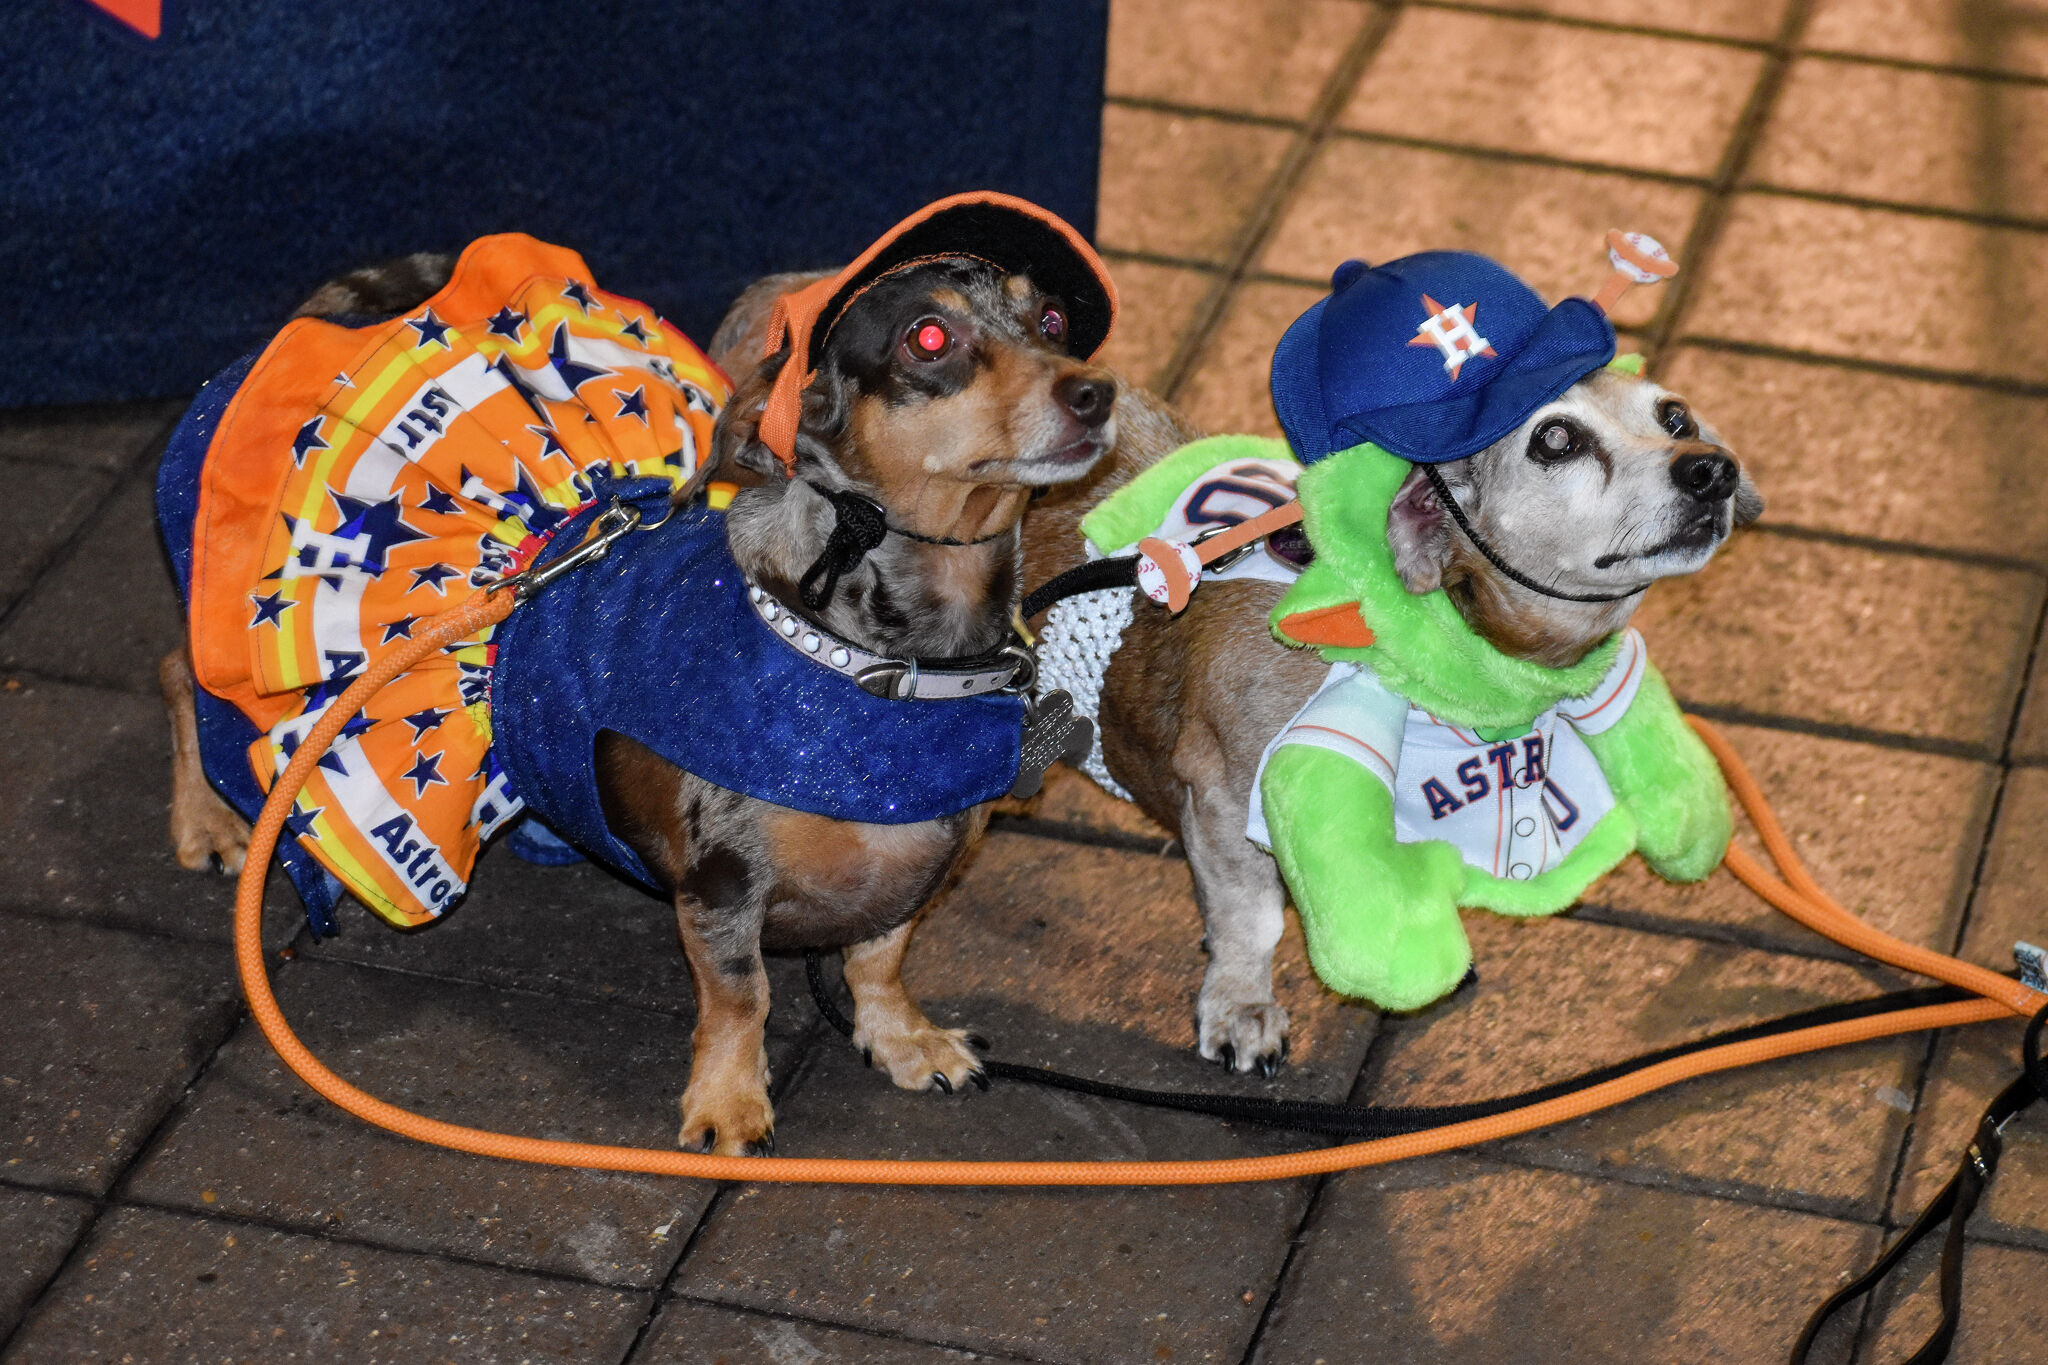 Pooches steal spotlight at Houston's annual Astros Dog Day